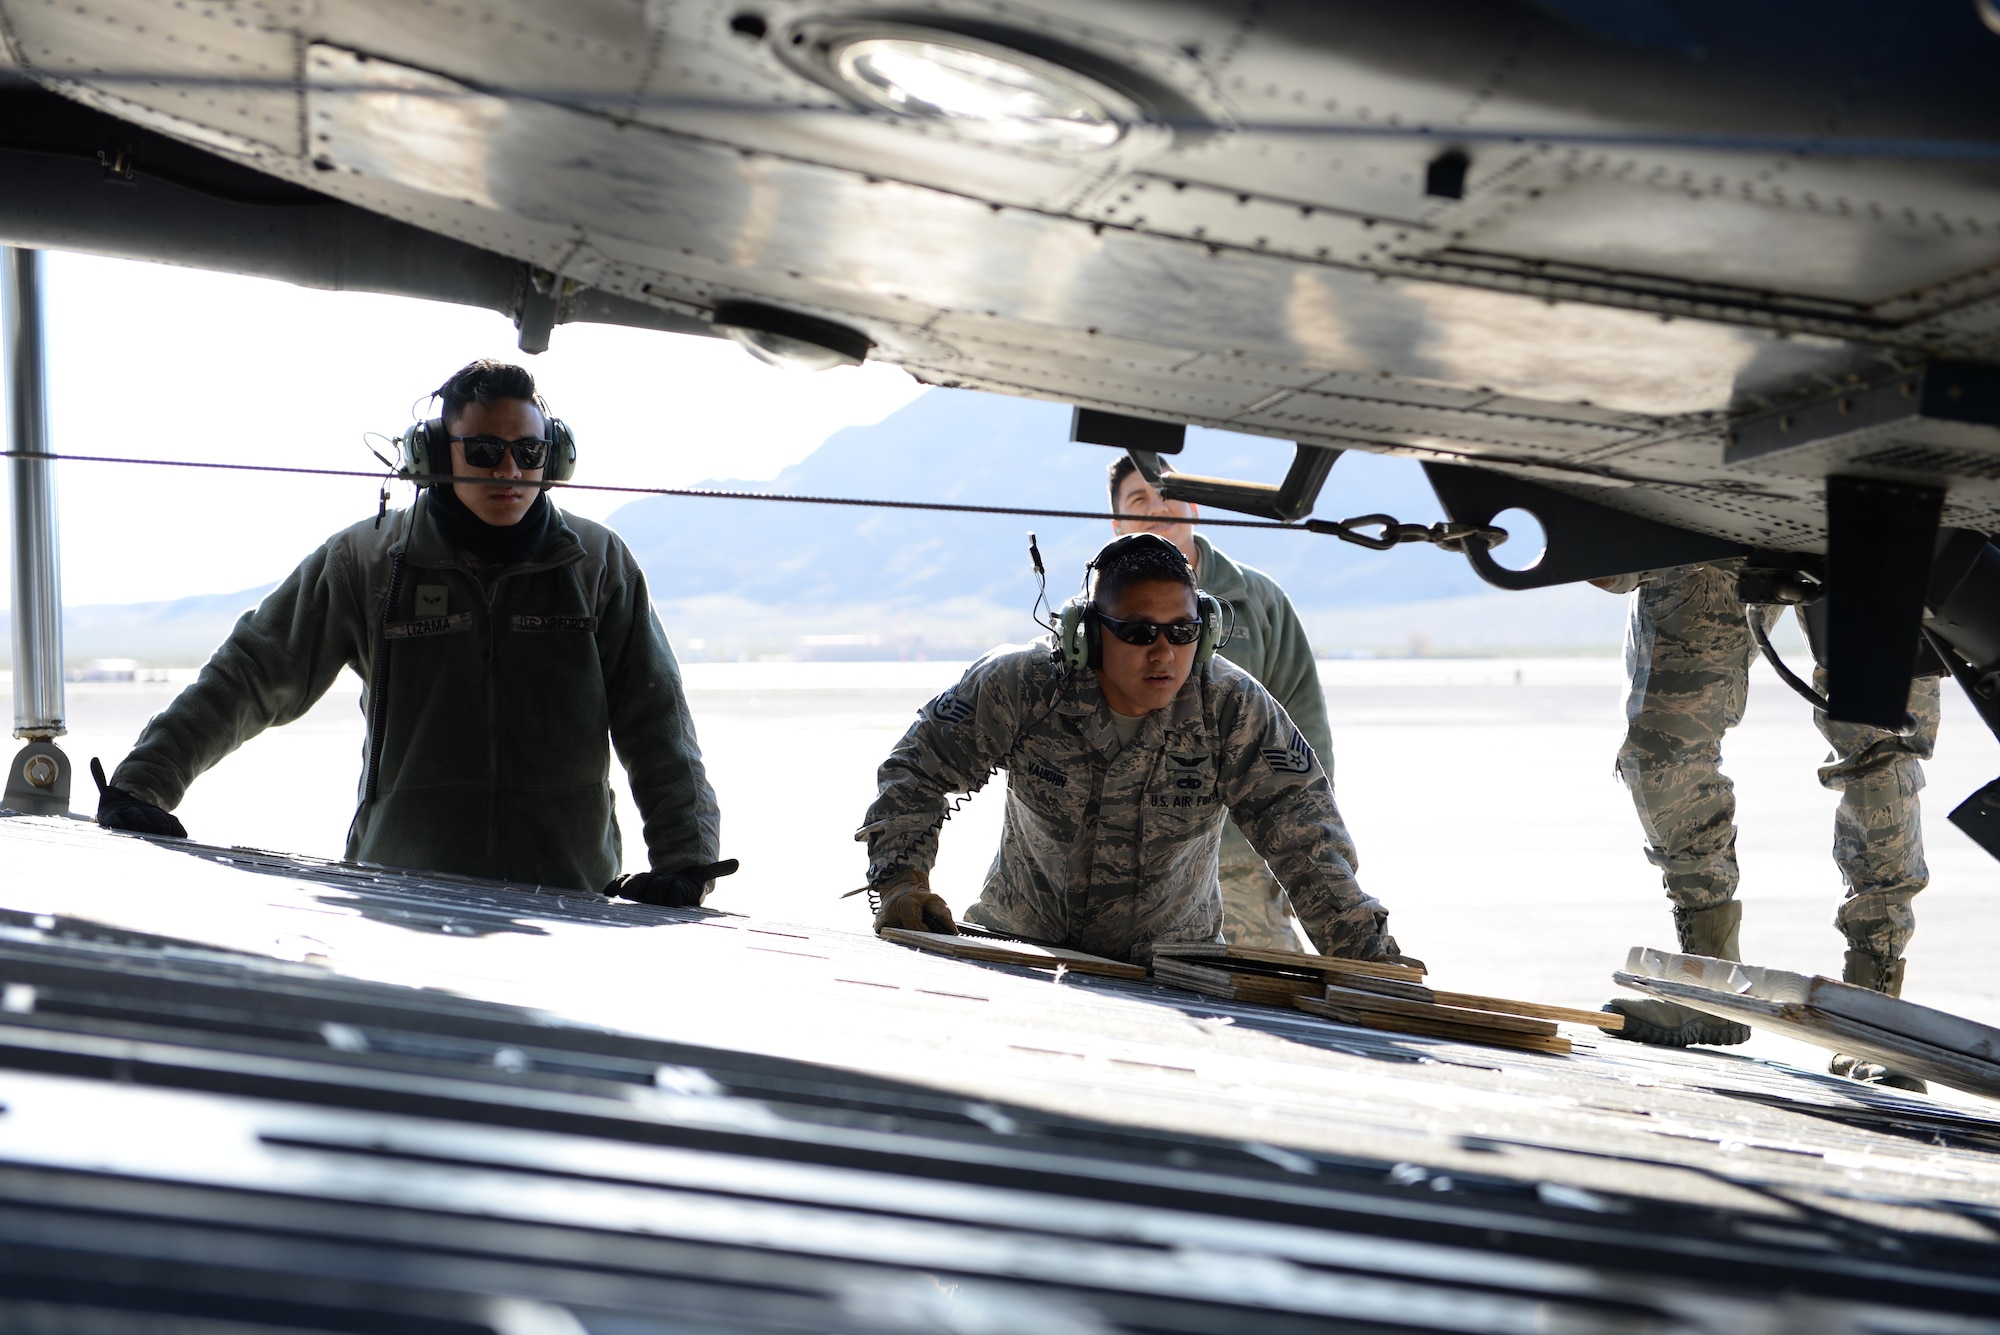 Airmen, 34th Weapons Squadron, check a winch cable before loading an HH-60 Pave Hawk helicopter onto a C-17 Globemaster III, assigned to the 57th Weapons Squadron, McChord Air Force Base, Wash., March 28, 2017, at Nellis Air Force Base, Nev. The C-17 Globemaster III cargo aircraft is capable of carrying personnel, vehicles and other aircraft over long distance travel. (U.S. Air Force photo by Airman 1st Class Andrew D. Sarver/ Released)